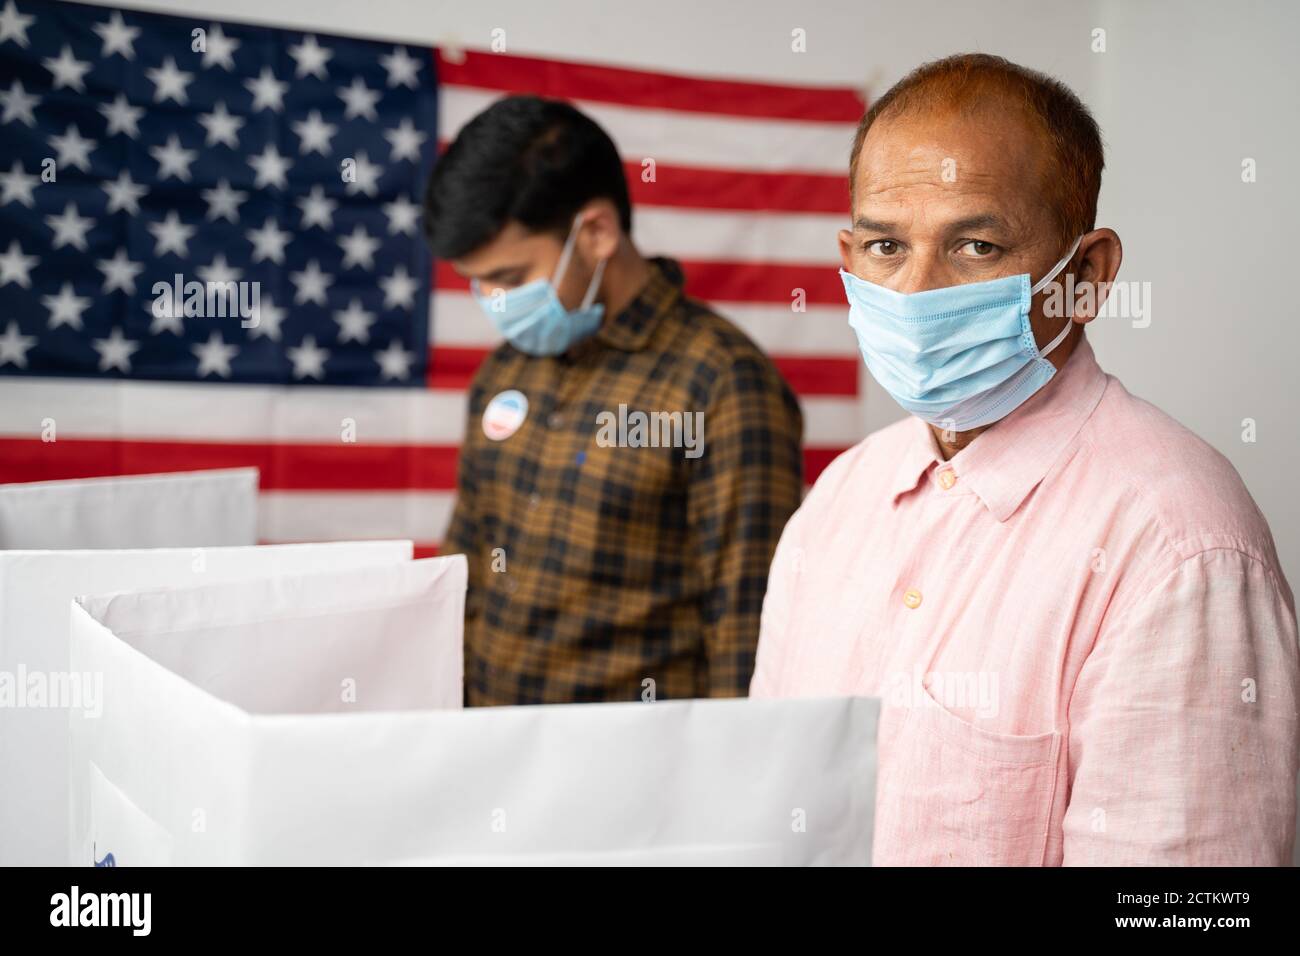 People with mask busy at polling booth for voting with US flag as background - concept of in person voting with covid-19 safety measures at us Stock Photo